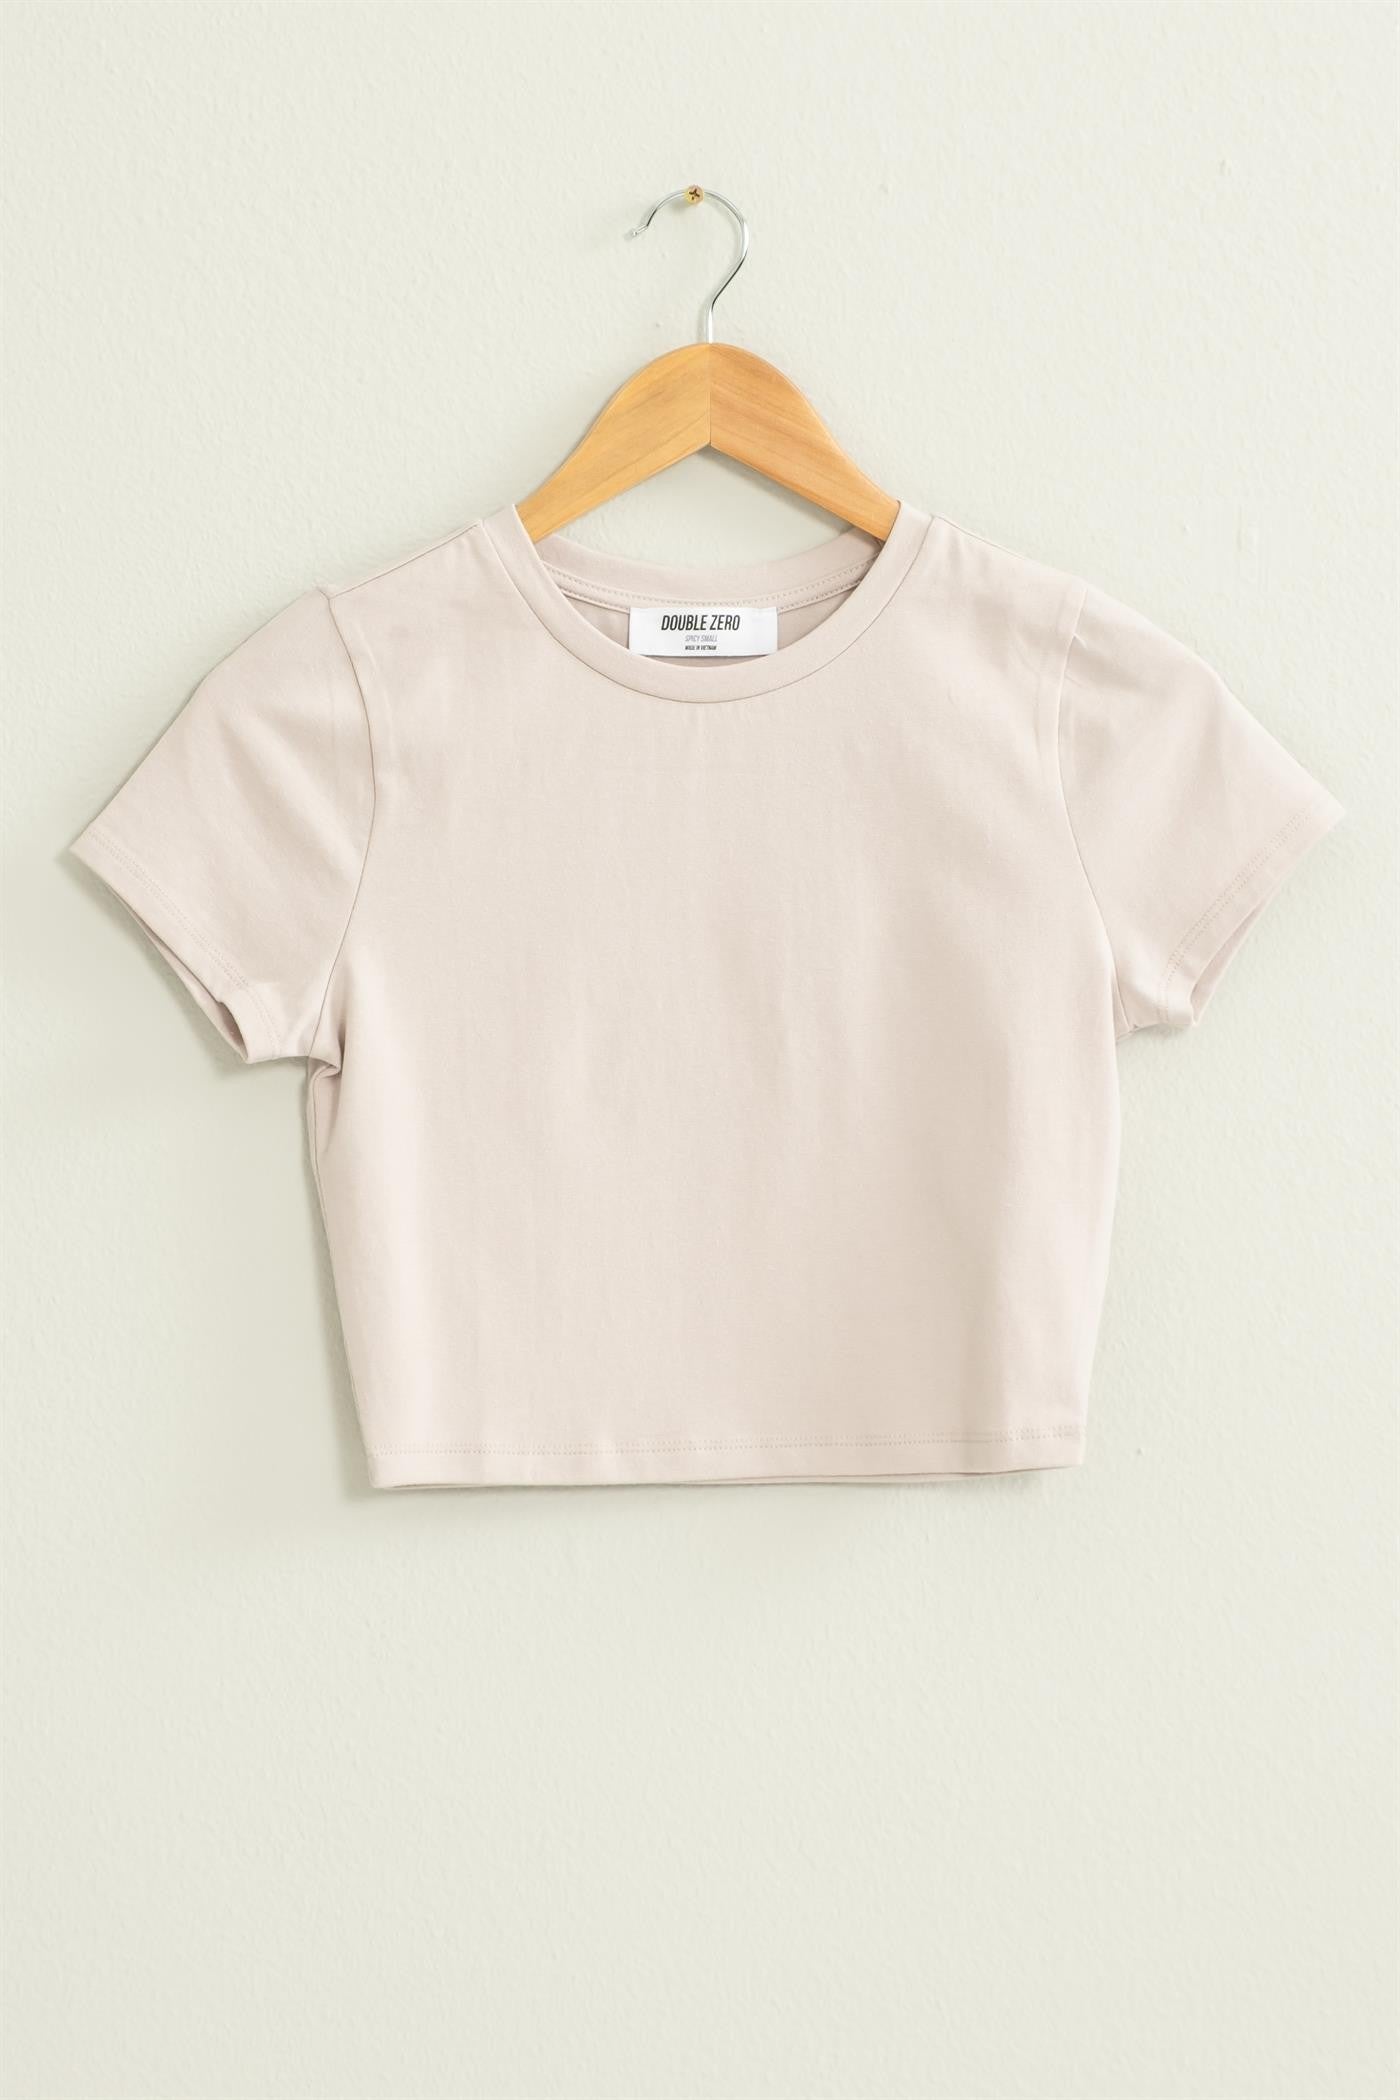 Can We Go Cropped Tee - Pastel Violet